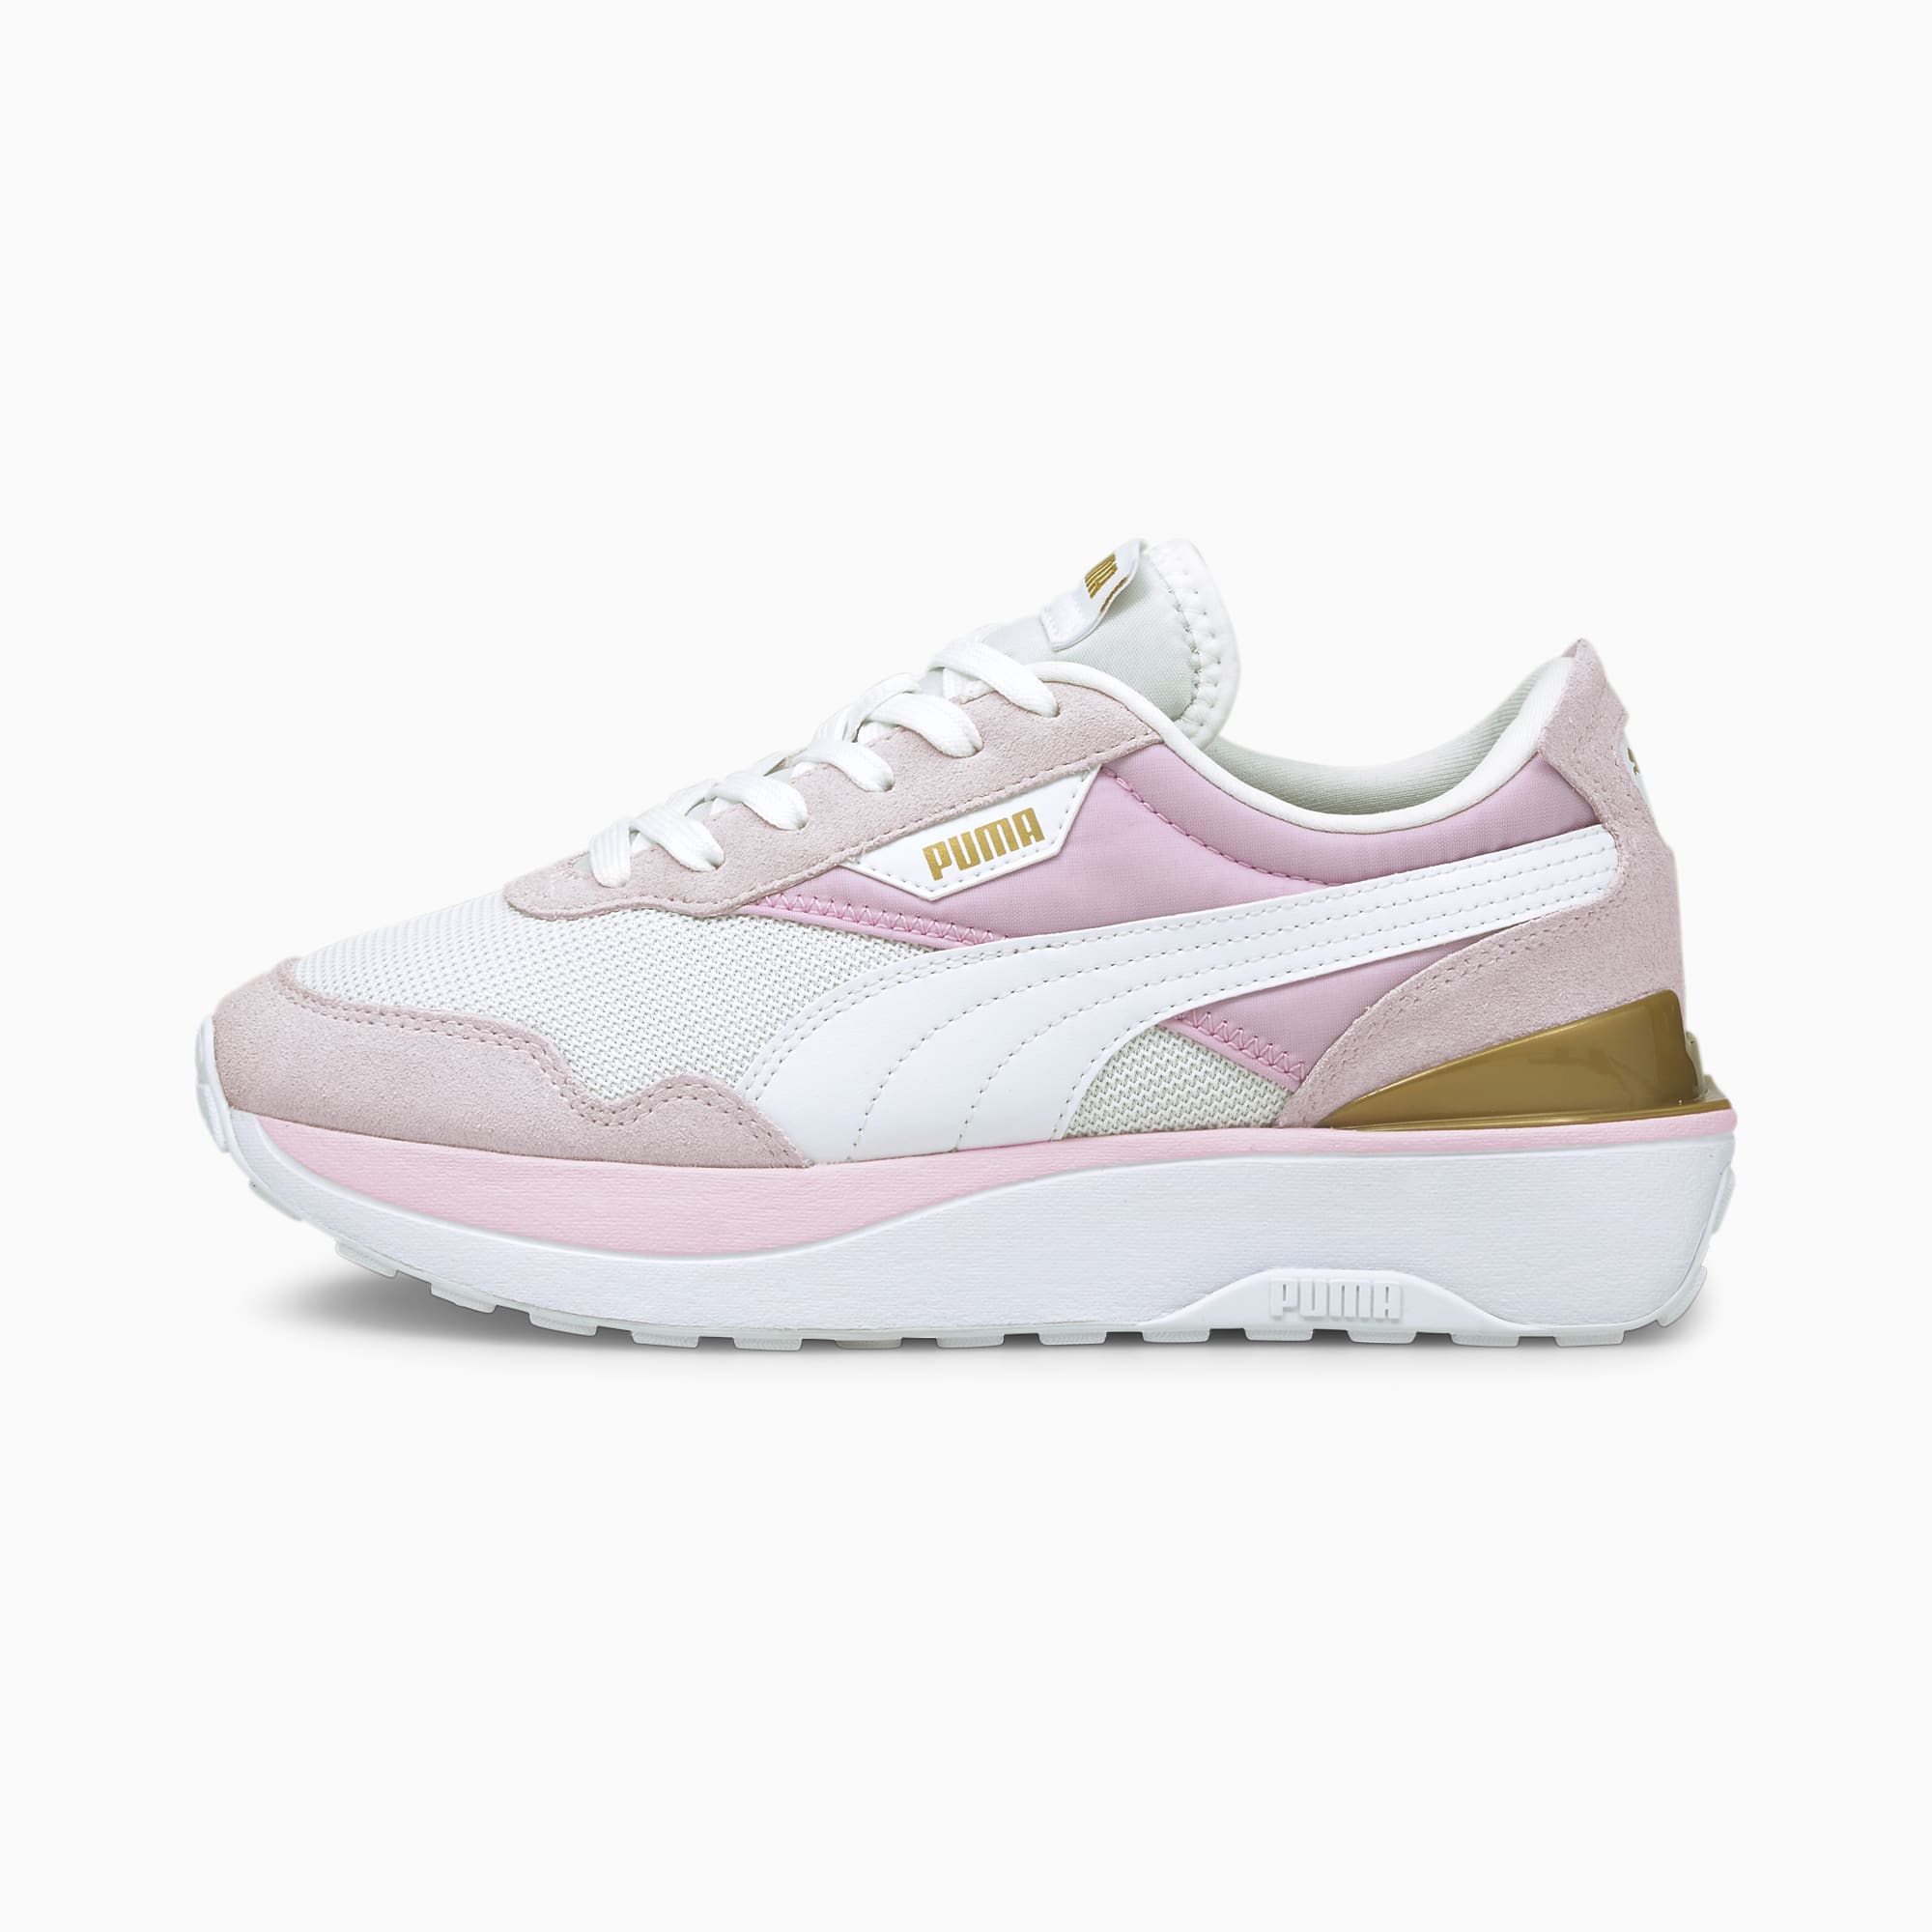 PUMA Chaussure Baskets Cruise Rider femme, Rose/Blanc, Taille 35.5, Chaussures